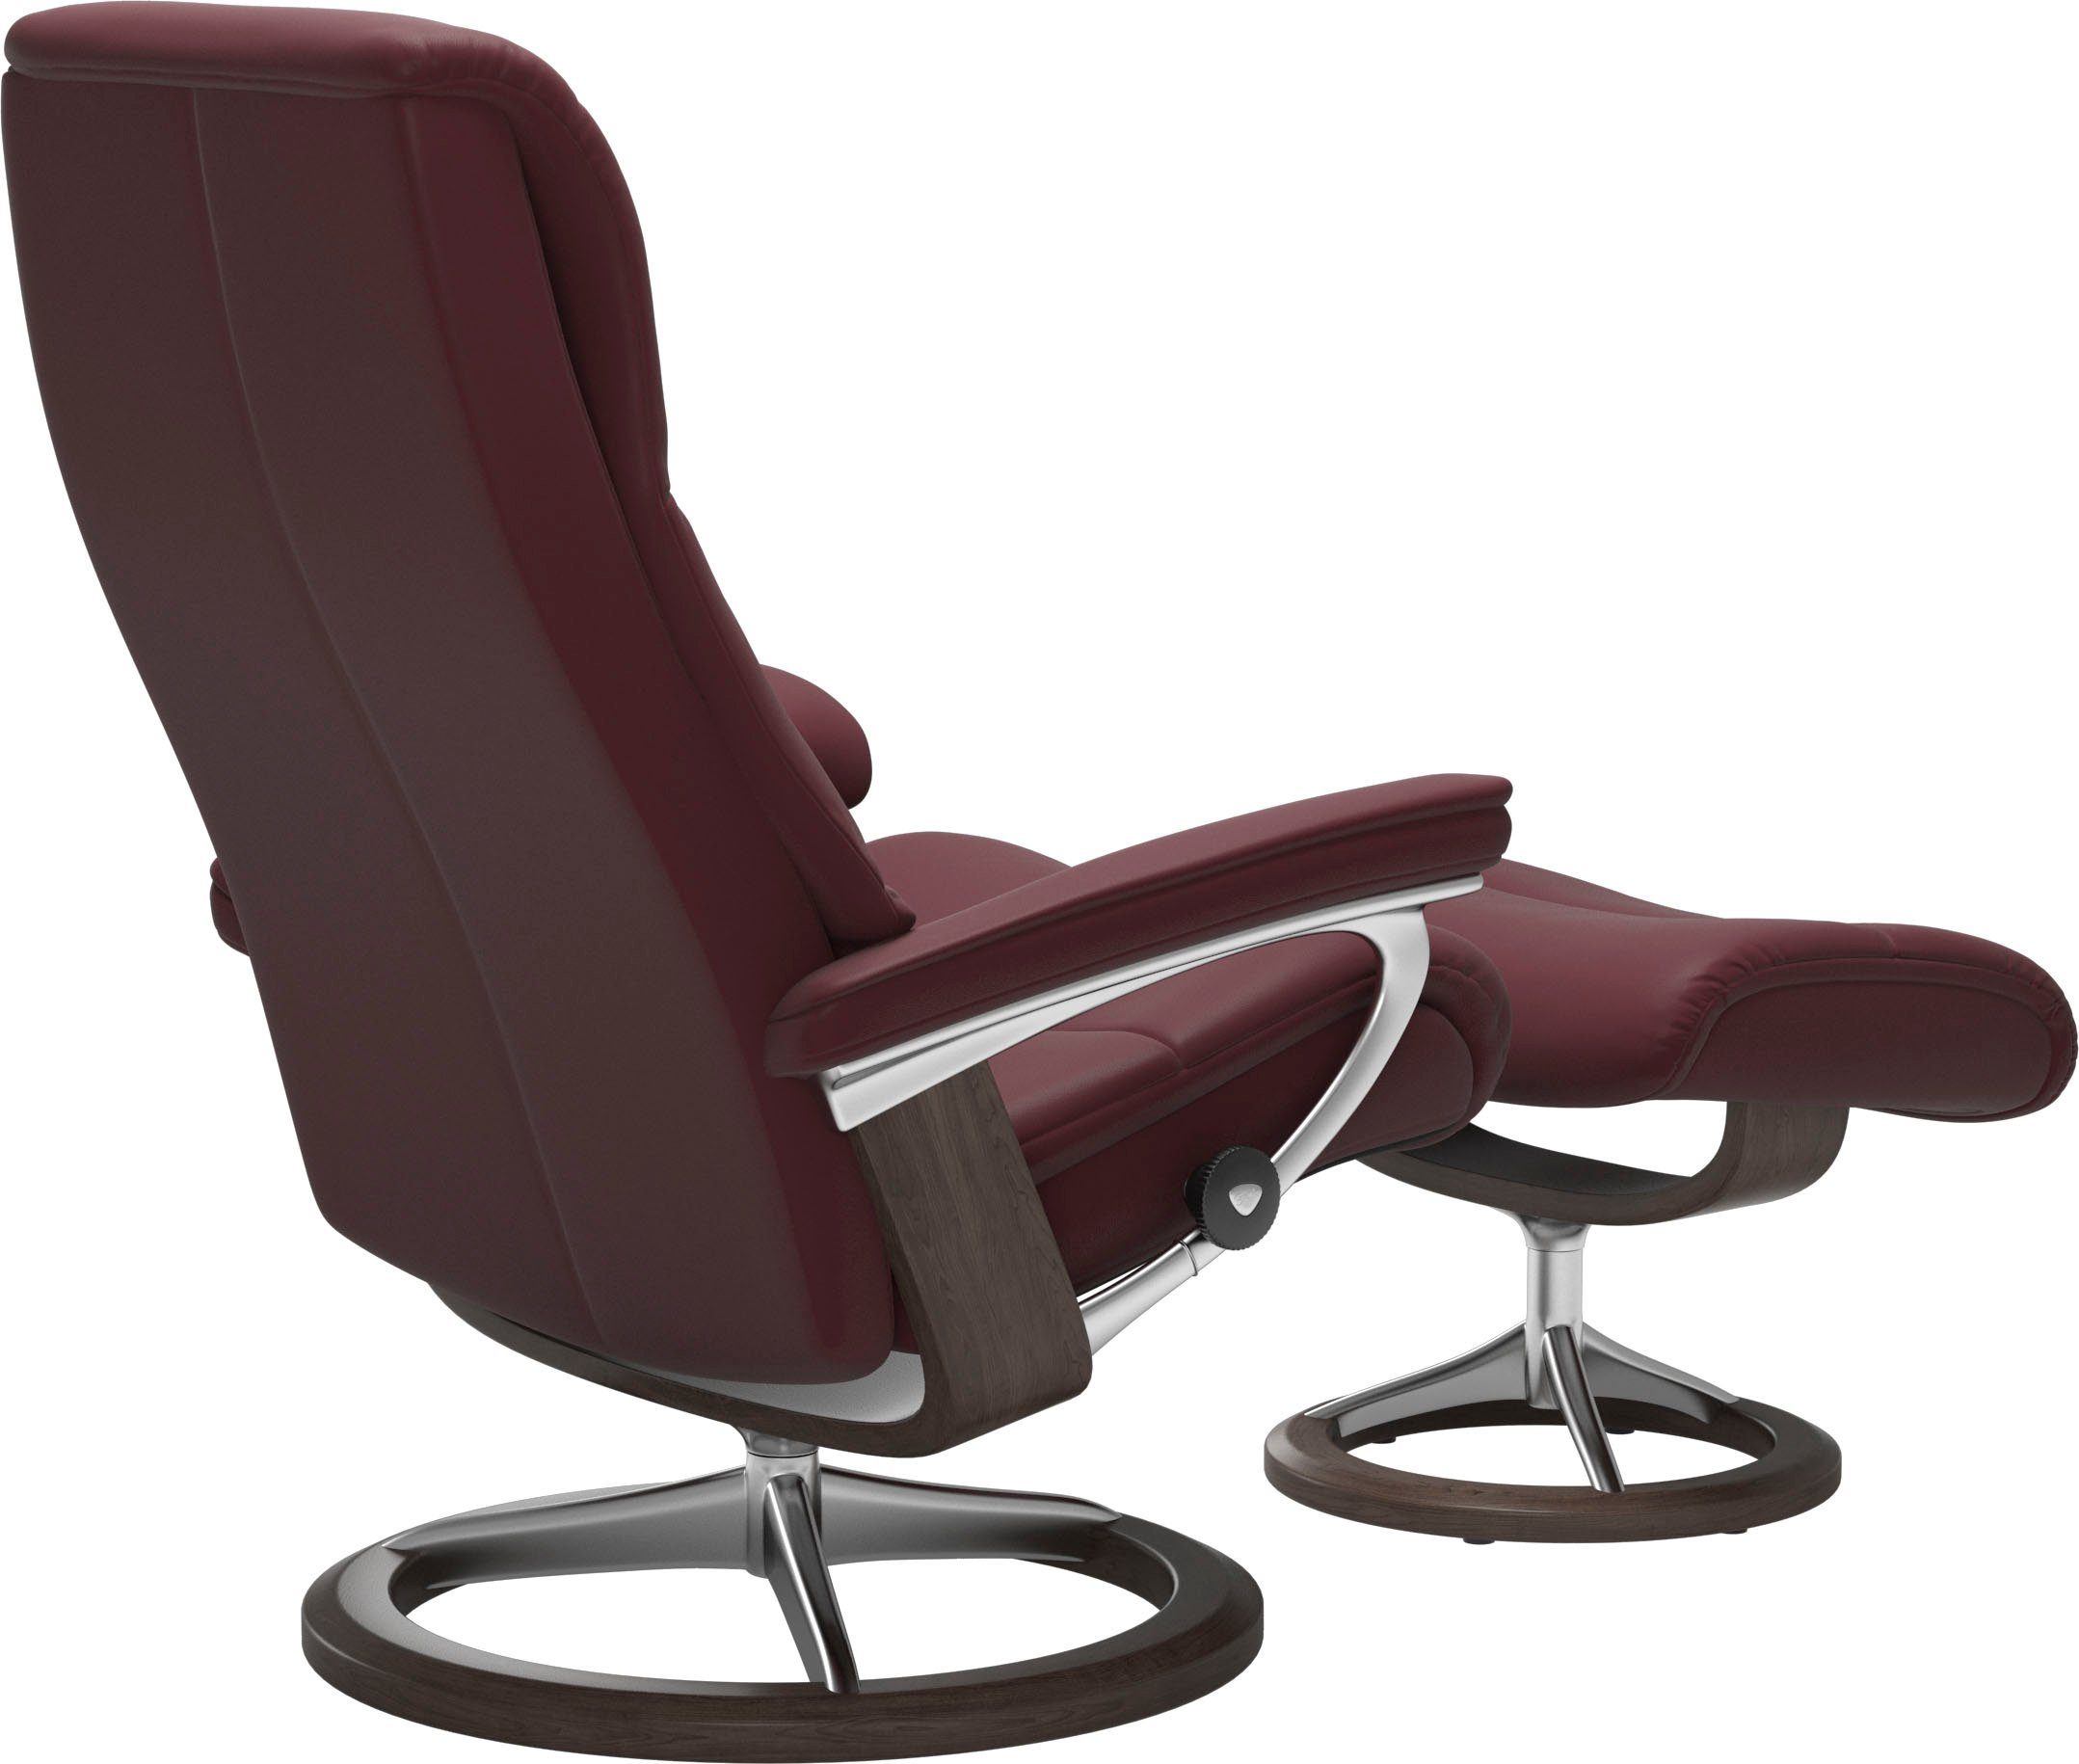 Relaxsessel Wenge Größe Base, Stressless® S,Gestell View, Signature mit